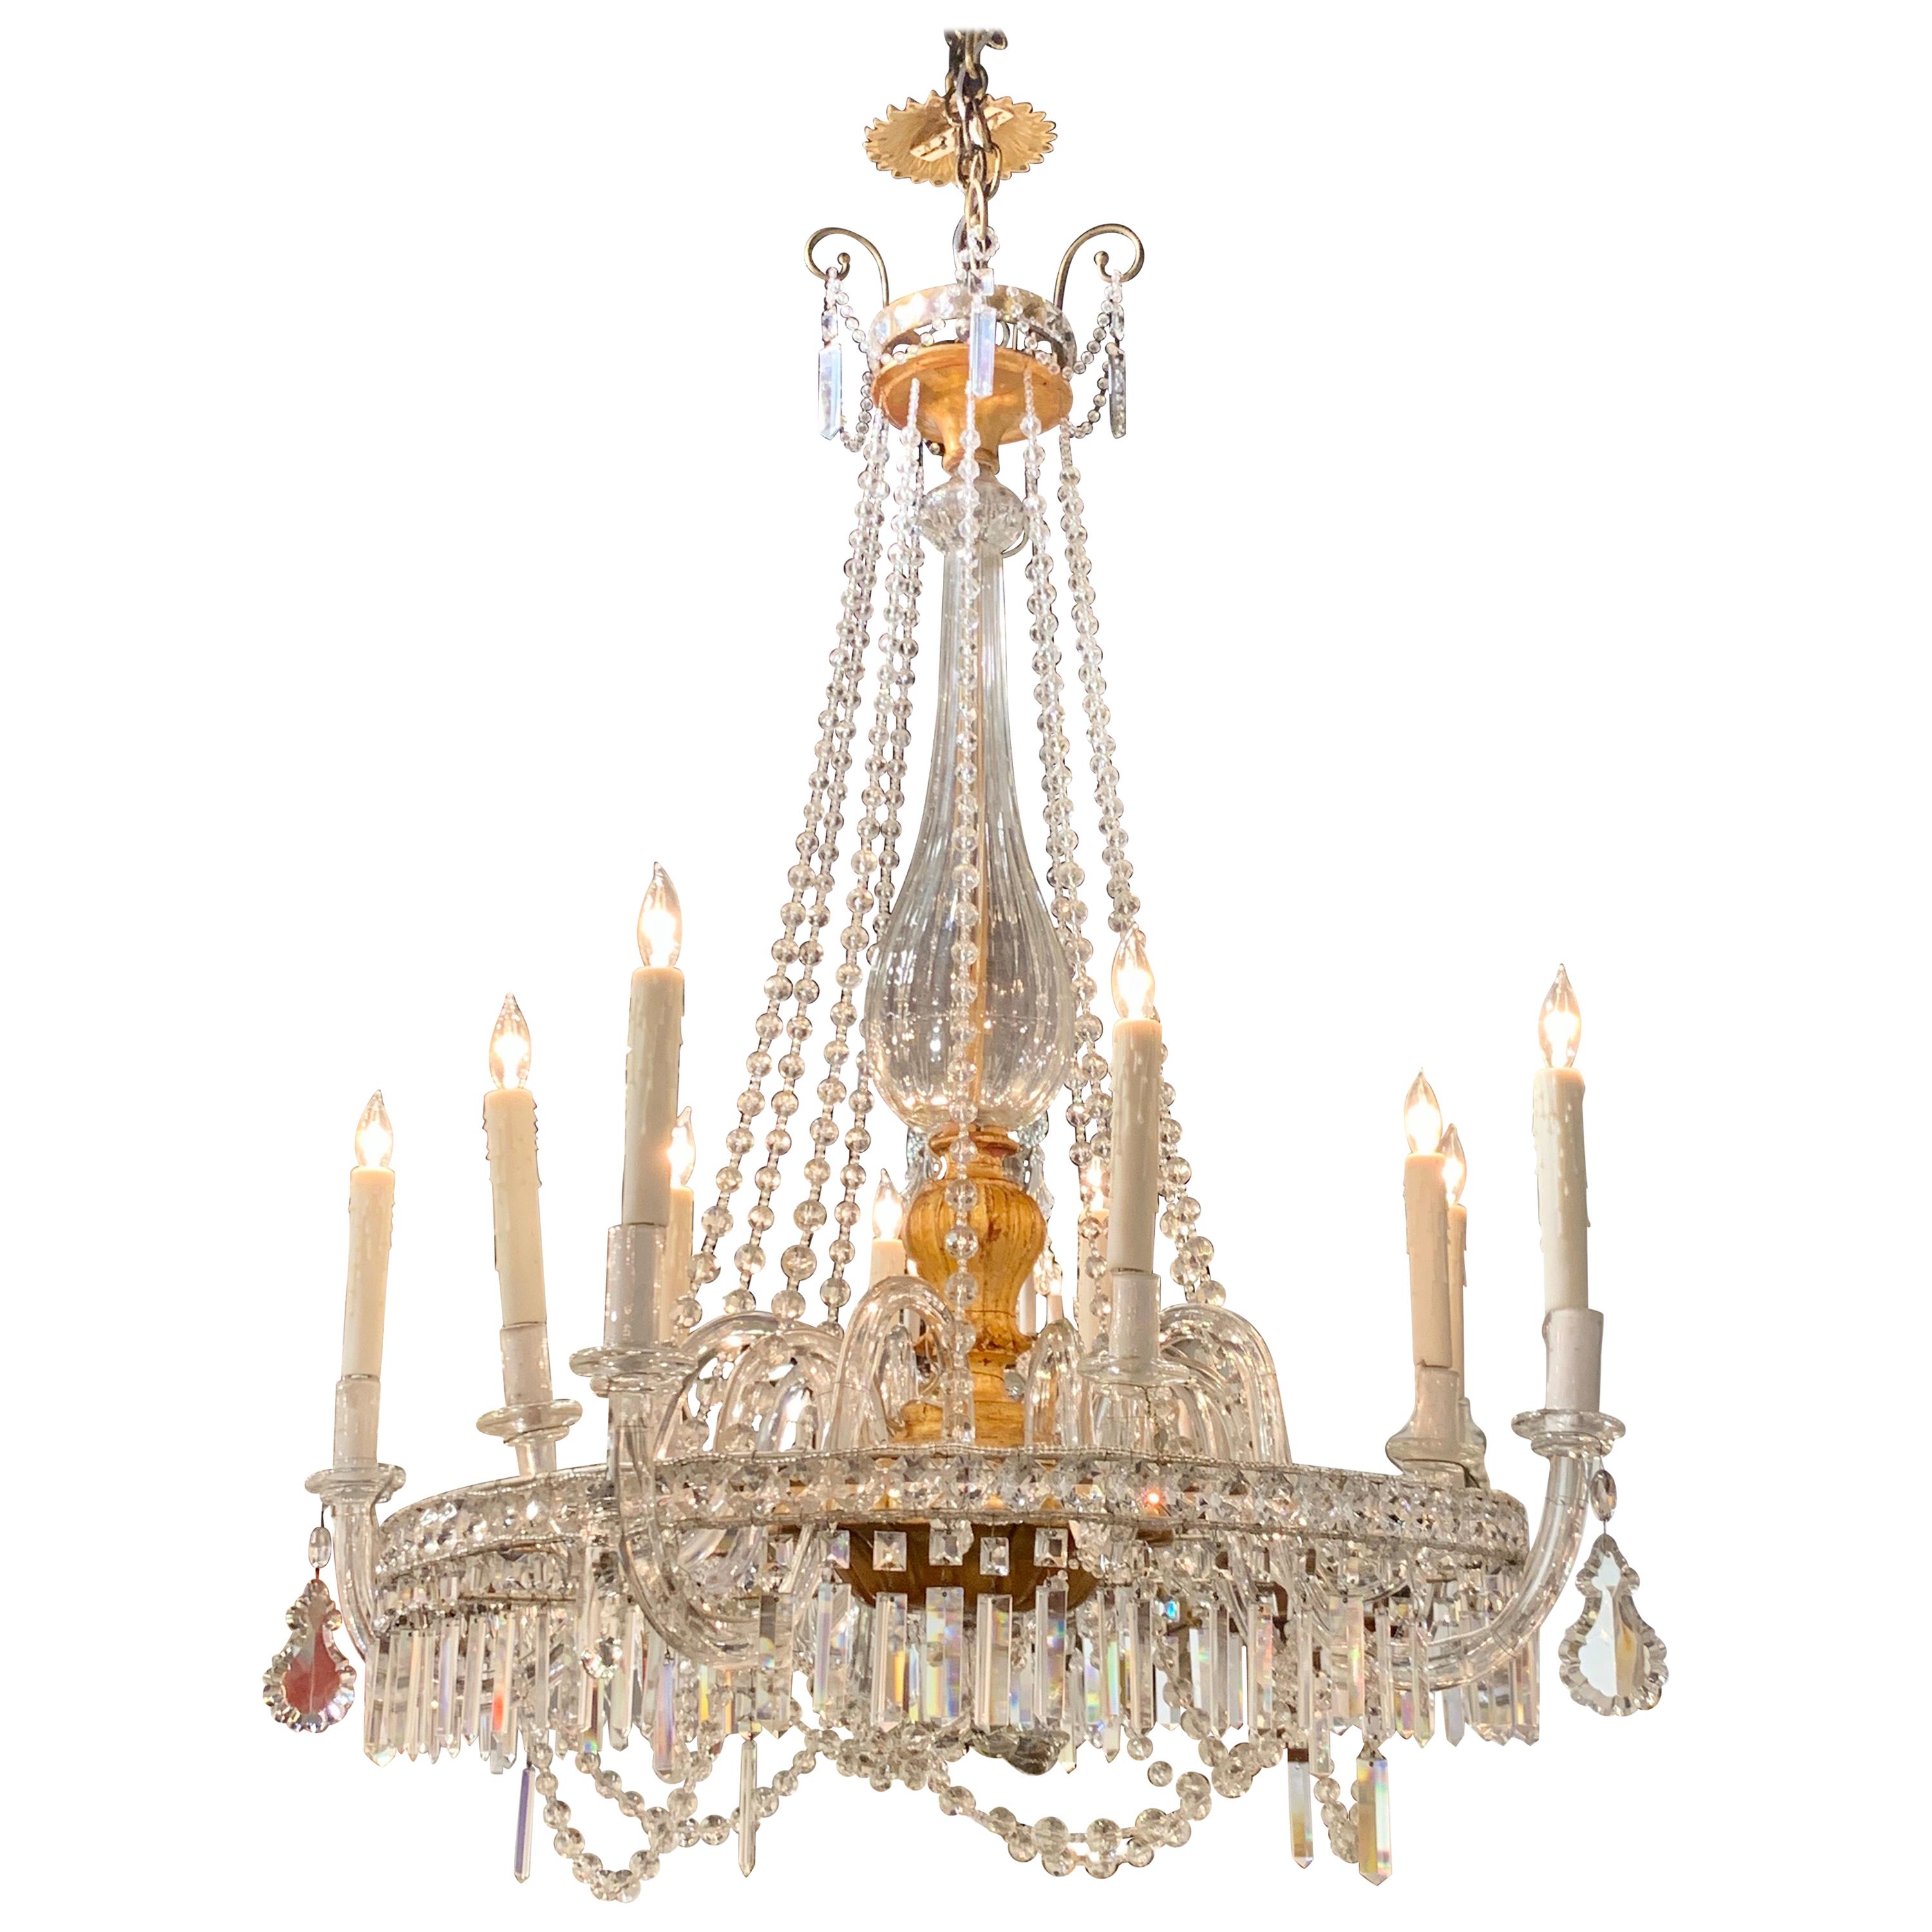 19th Century Italian Giltwood and Crystal 10-Light Chandelier